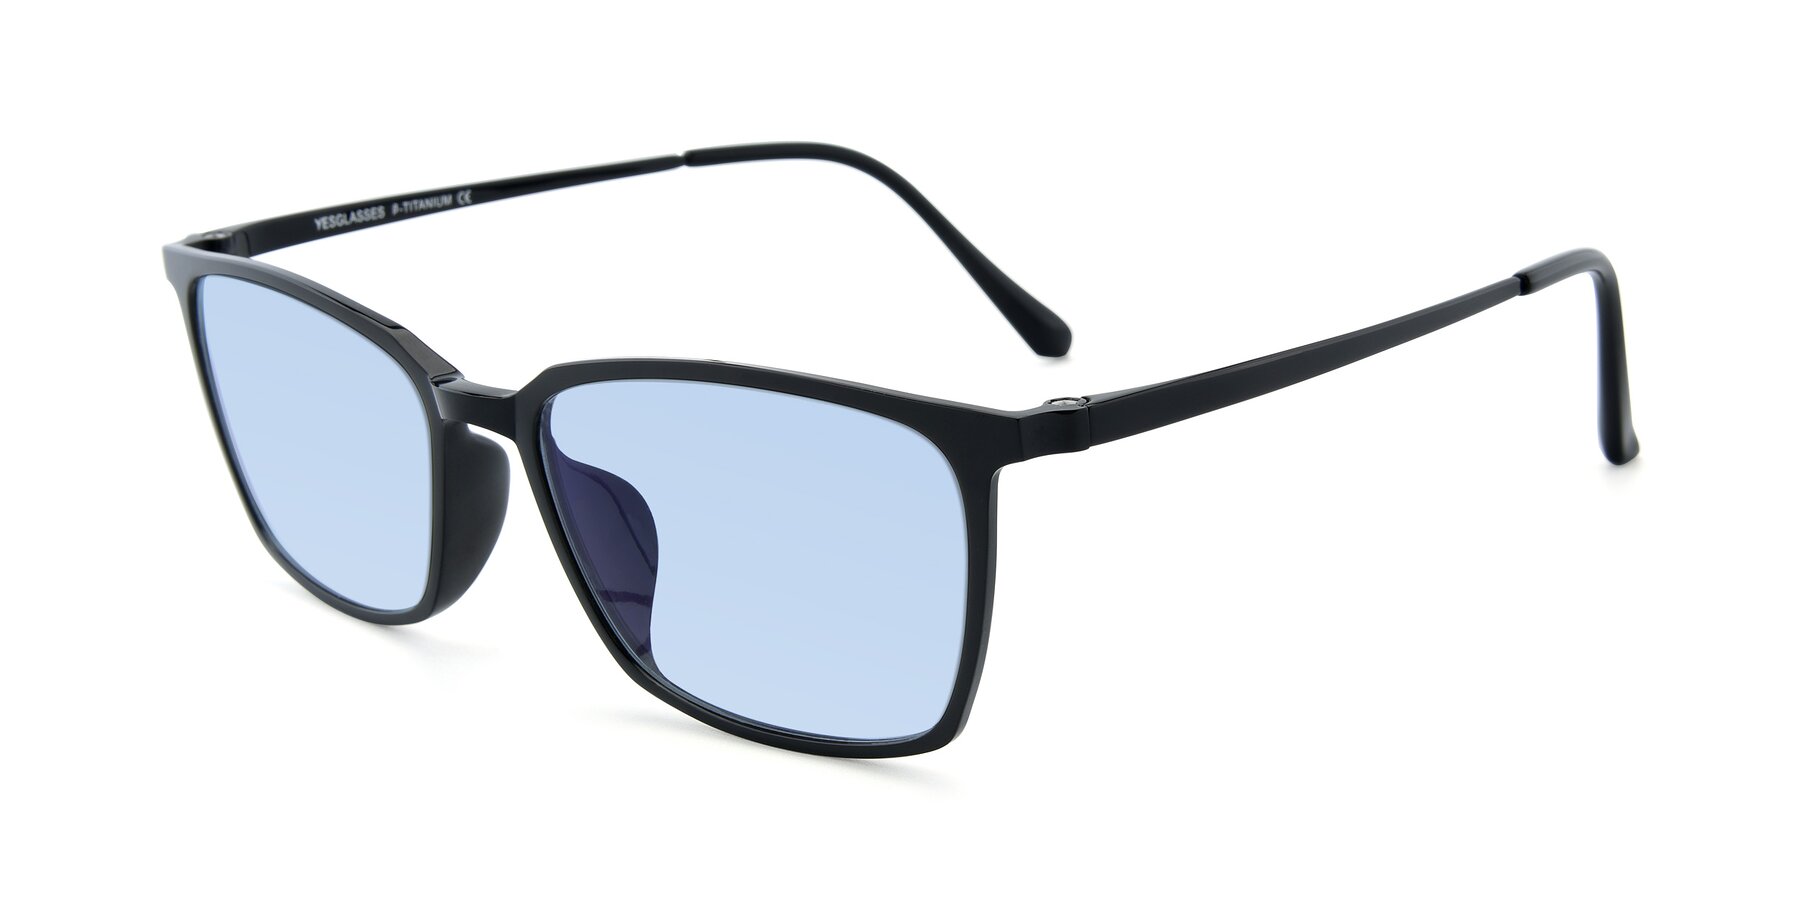 Angle of XC-5009 in Black with Light Blue Tinted Lenses